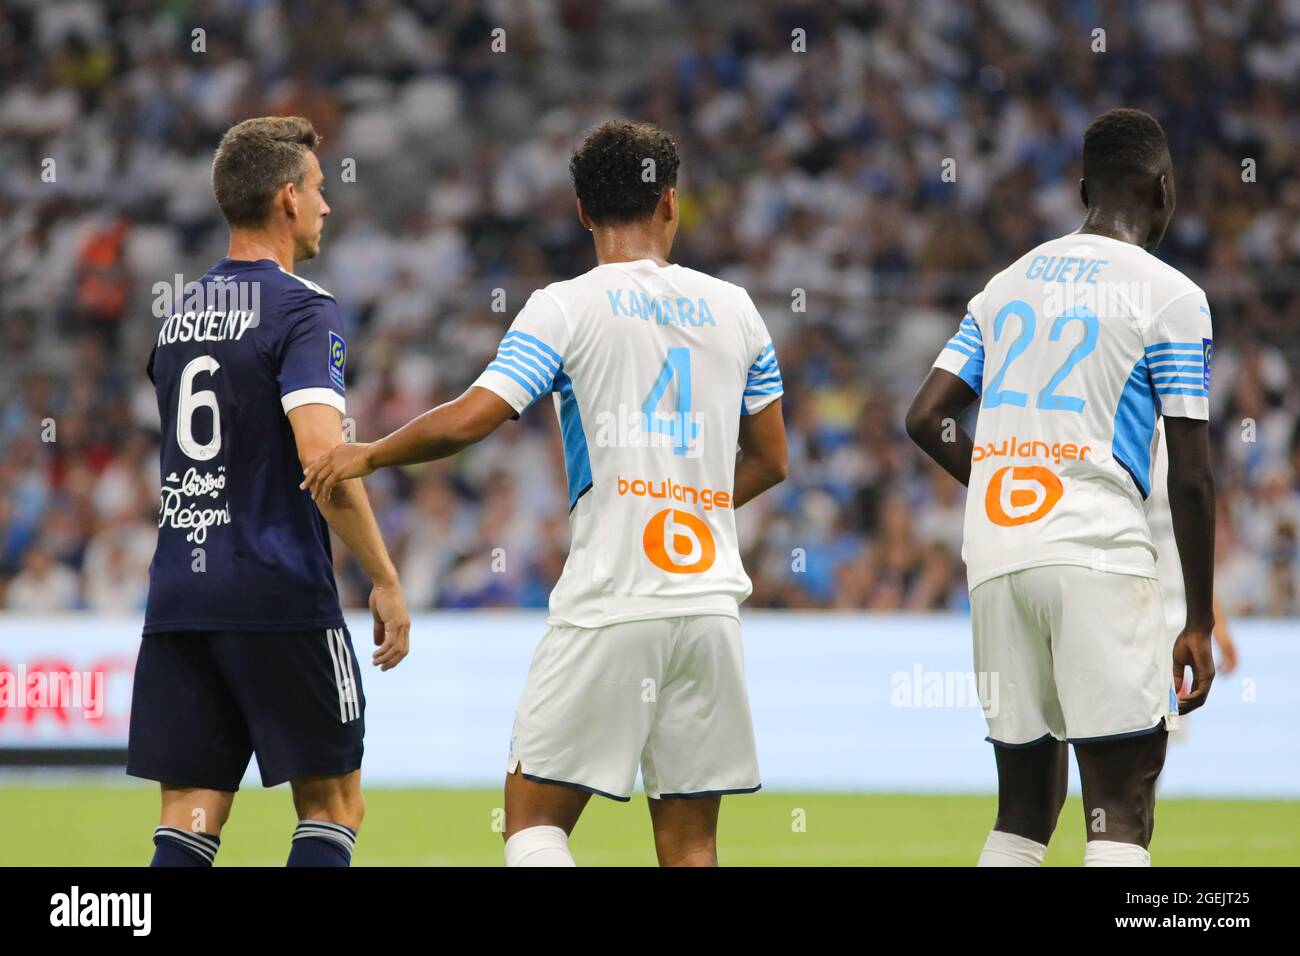 (L-R) L. Koscielny of Bordeaux, Kamara and Gueye of Marseille during the Ligue 1 Uber Eats match between Marseille and Bordeaux at Orange Velodrome on Stock Photo